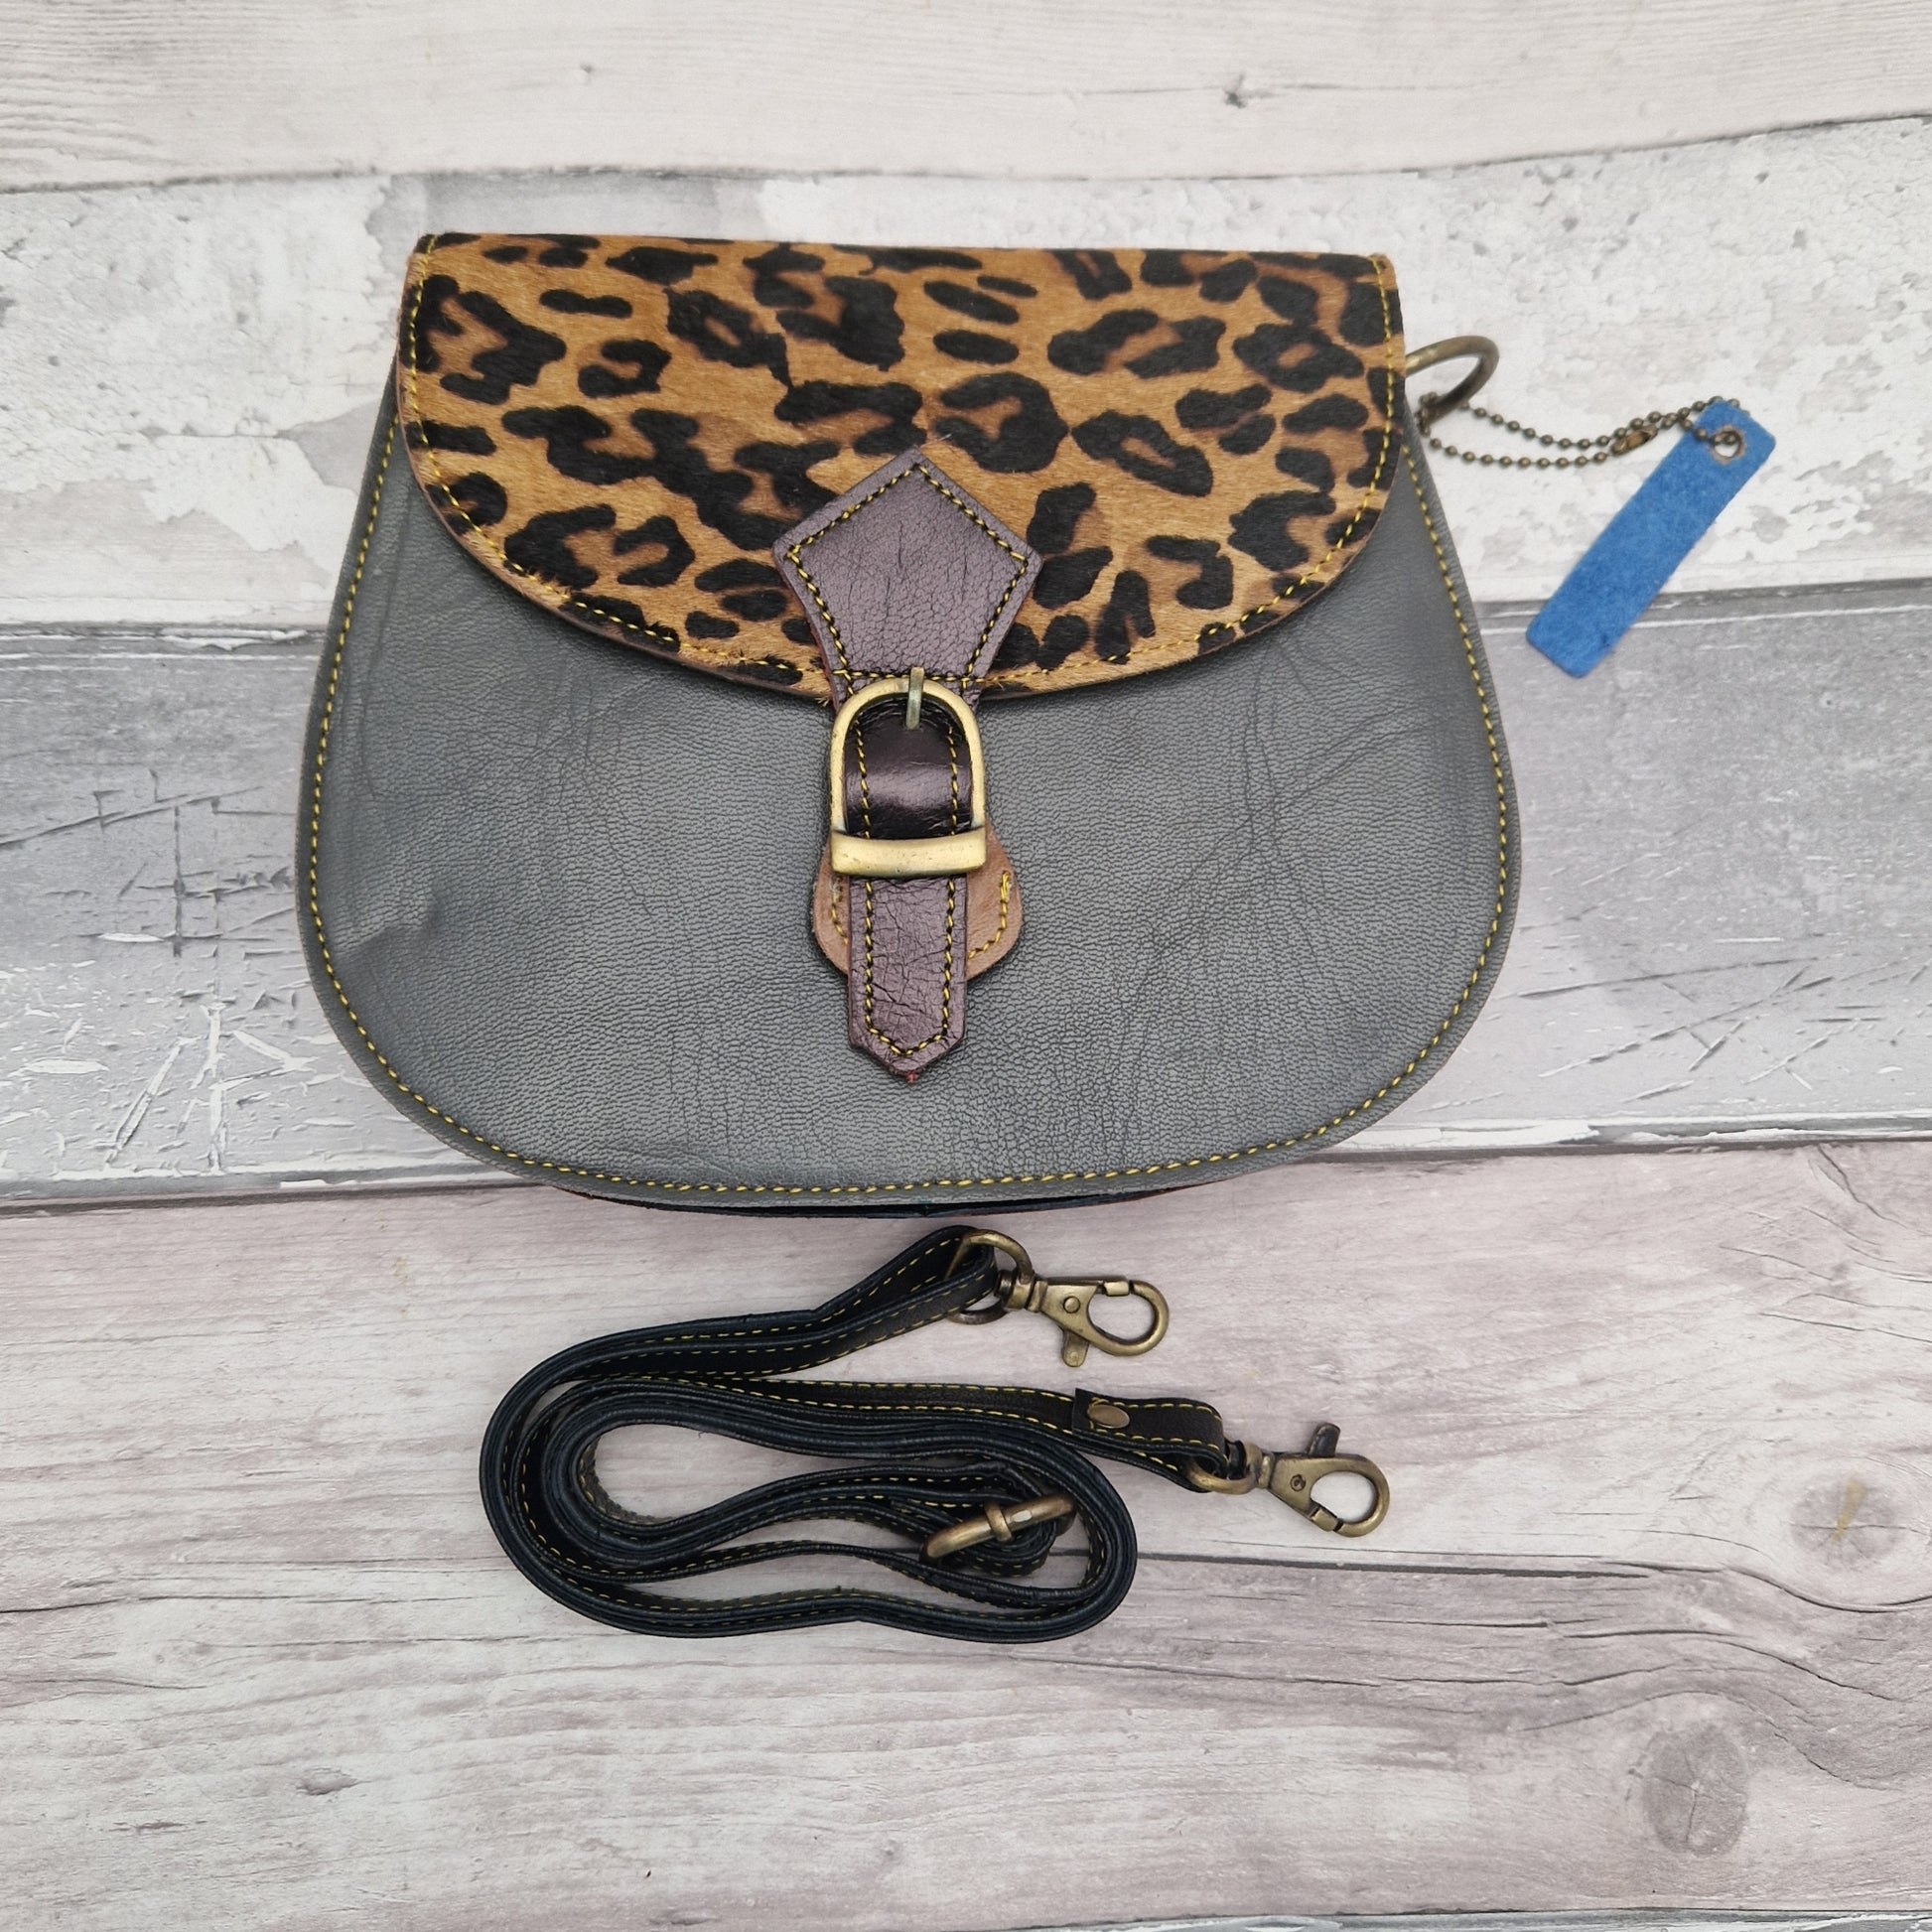 Grey leather bag with a textured panel of Jaguar print.